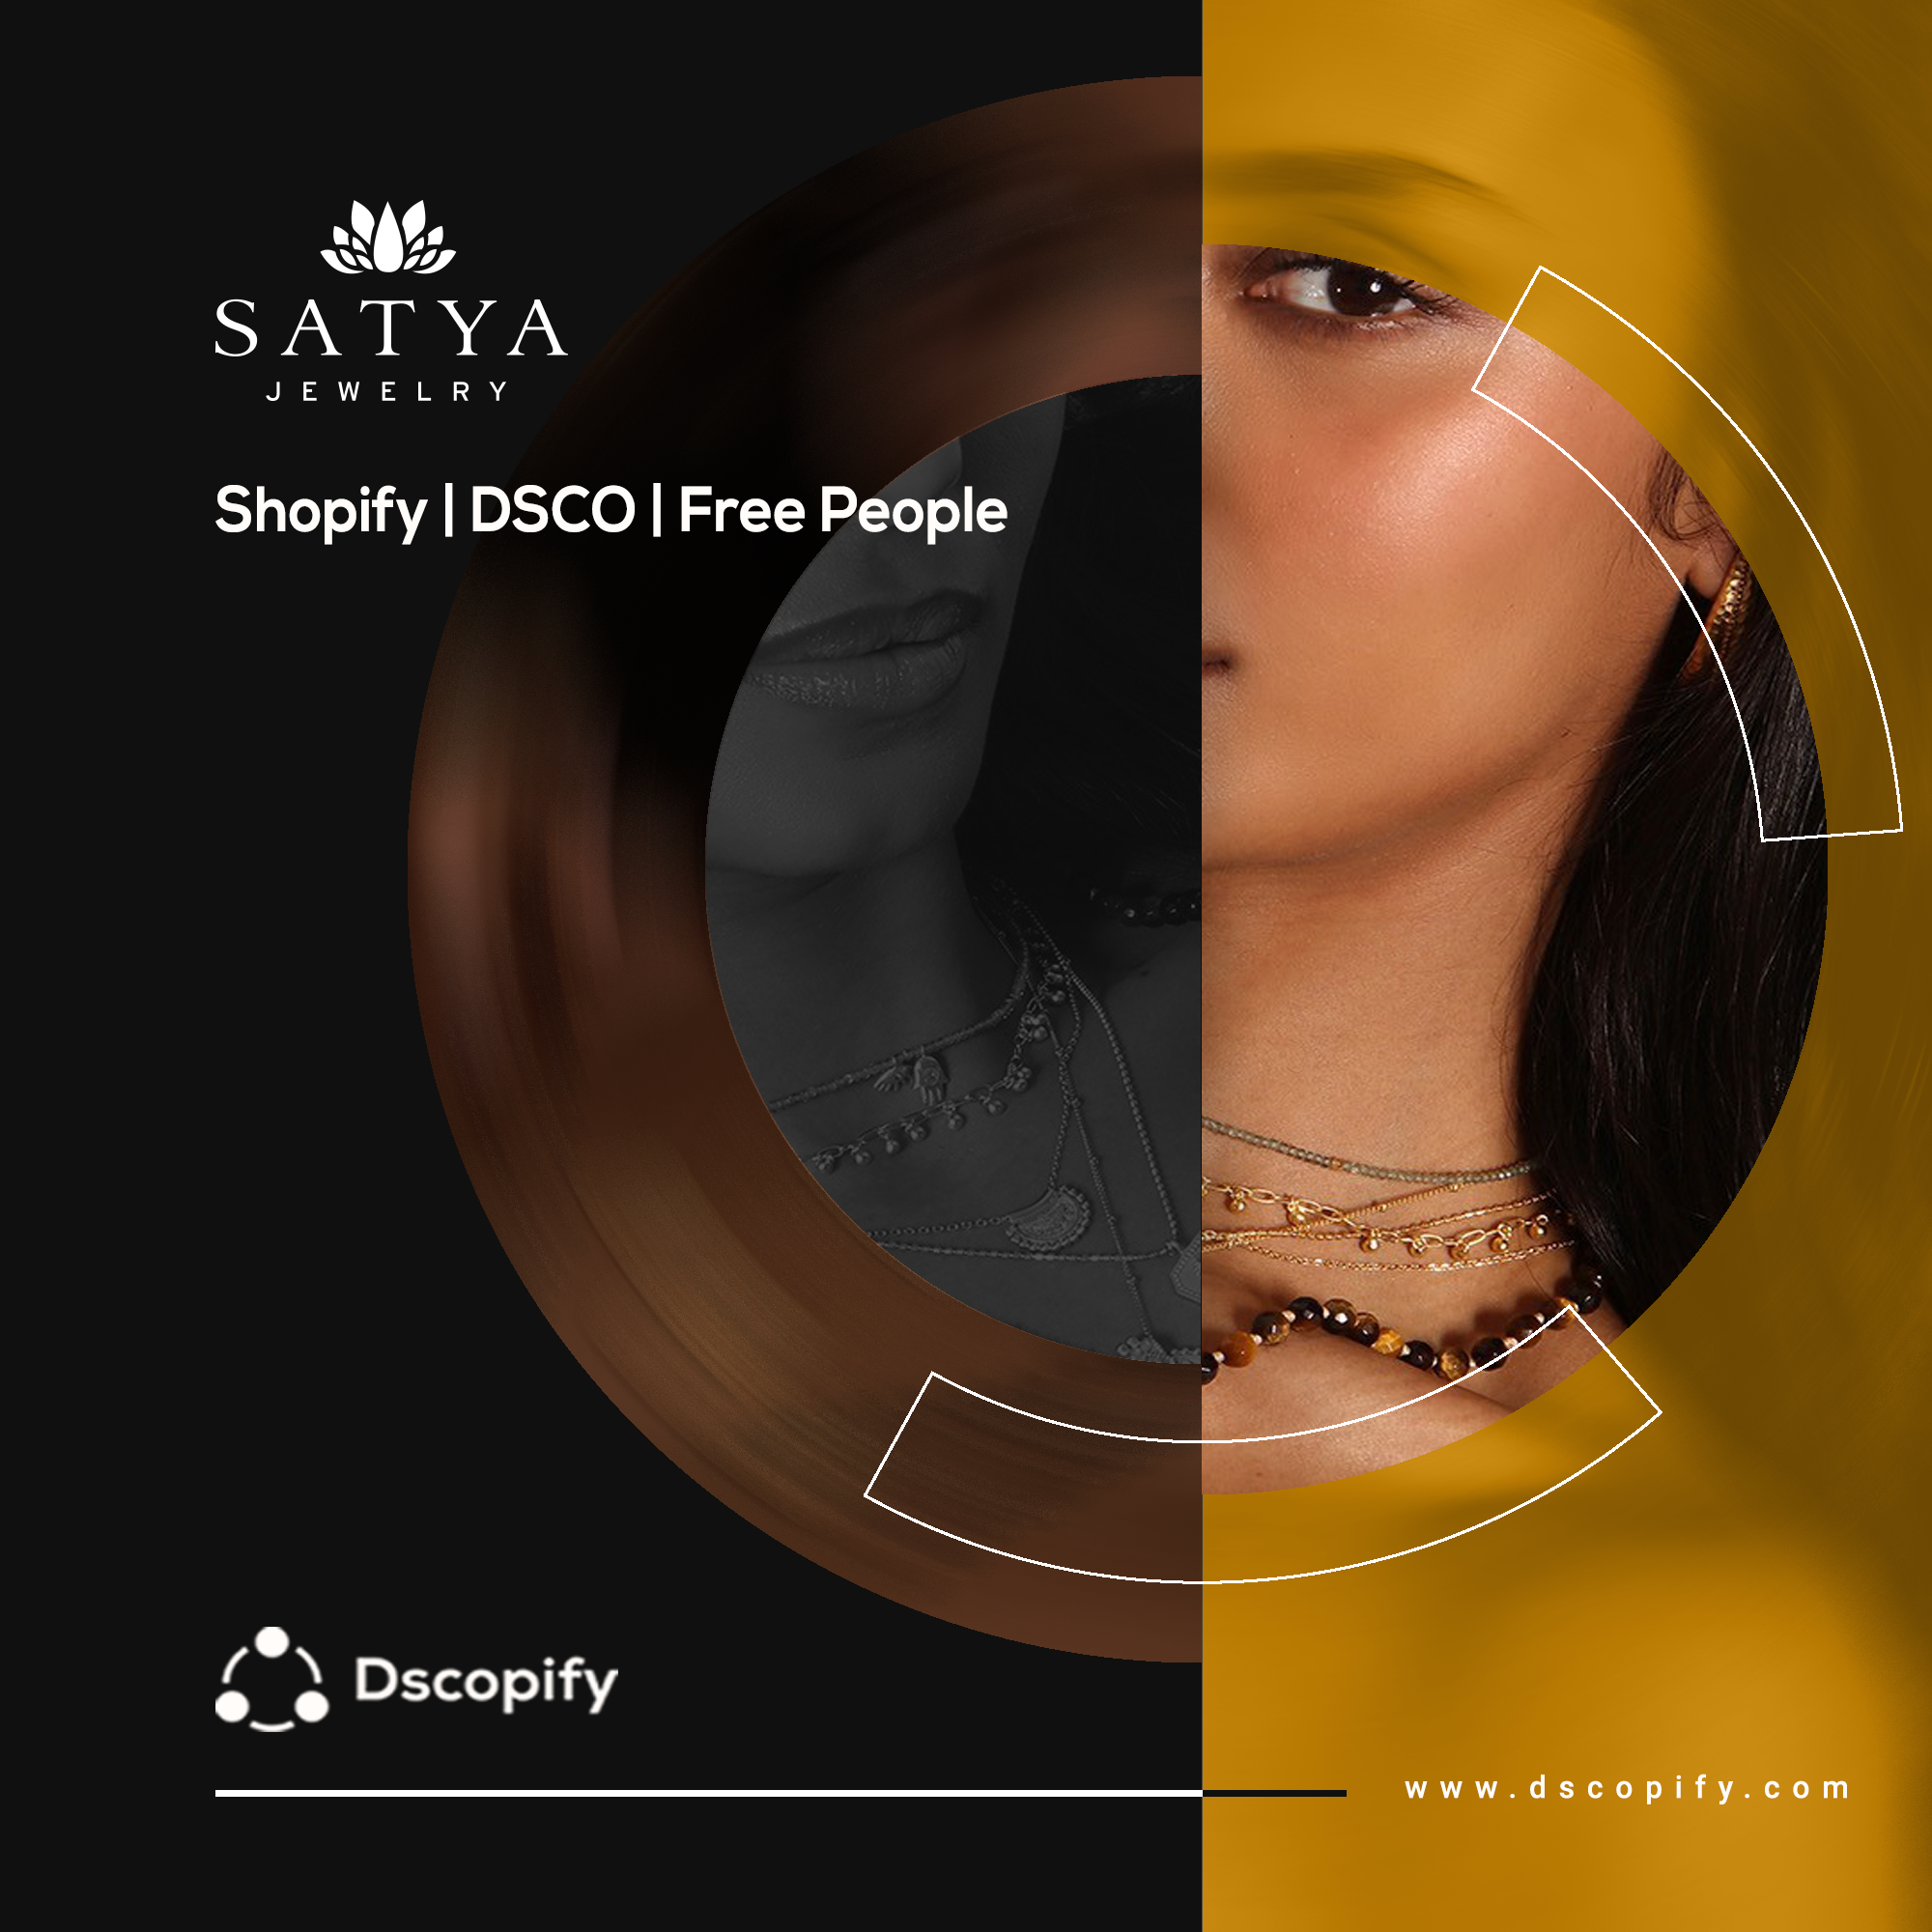 Integration of Shopify and DSCO for Satya Jewelry and Free People